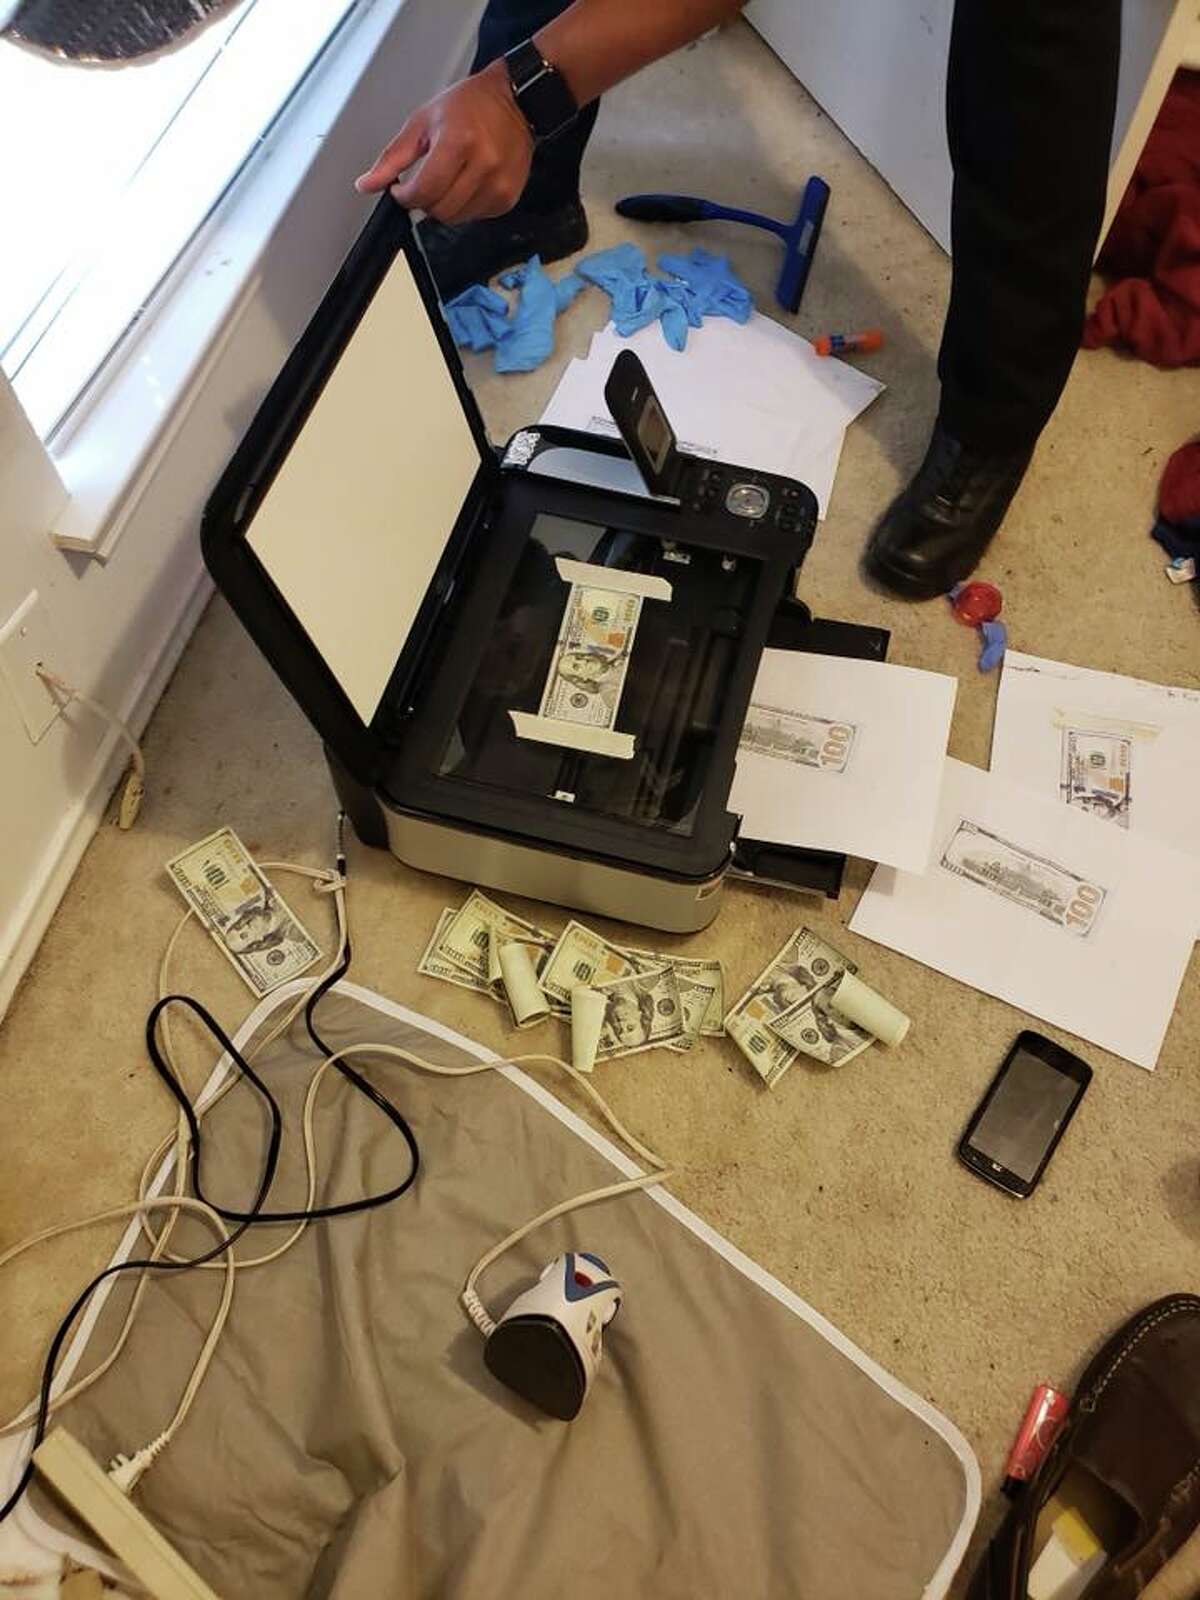 San Antonio police seized $1,000 in counterfeit cash and narcotics from a Northeast Side home on July 9, 2018.